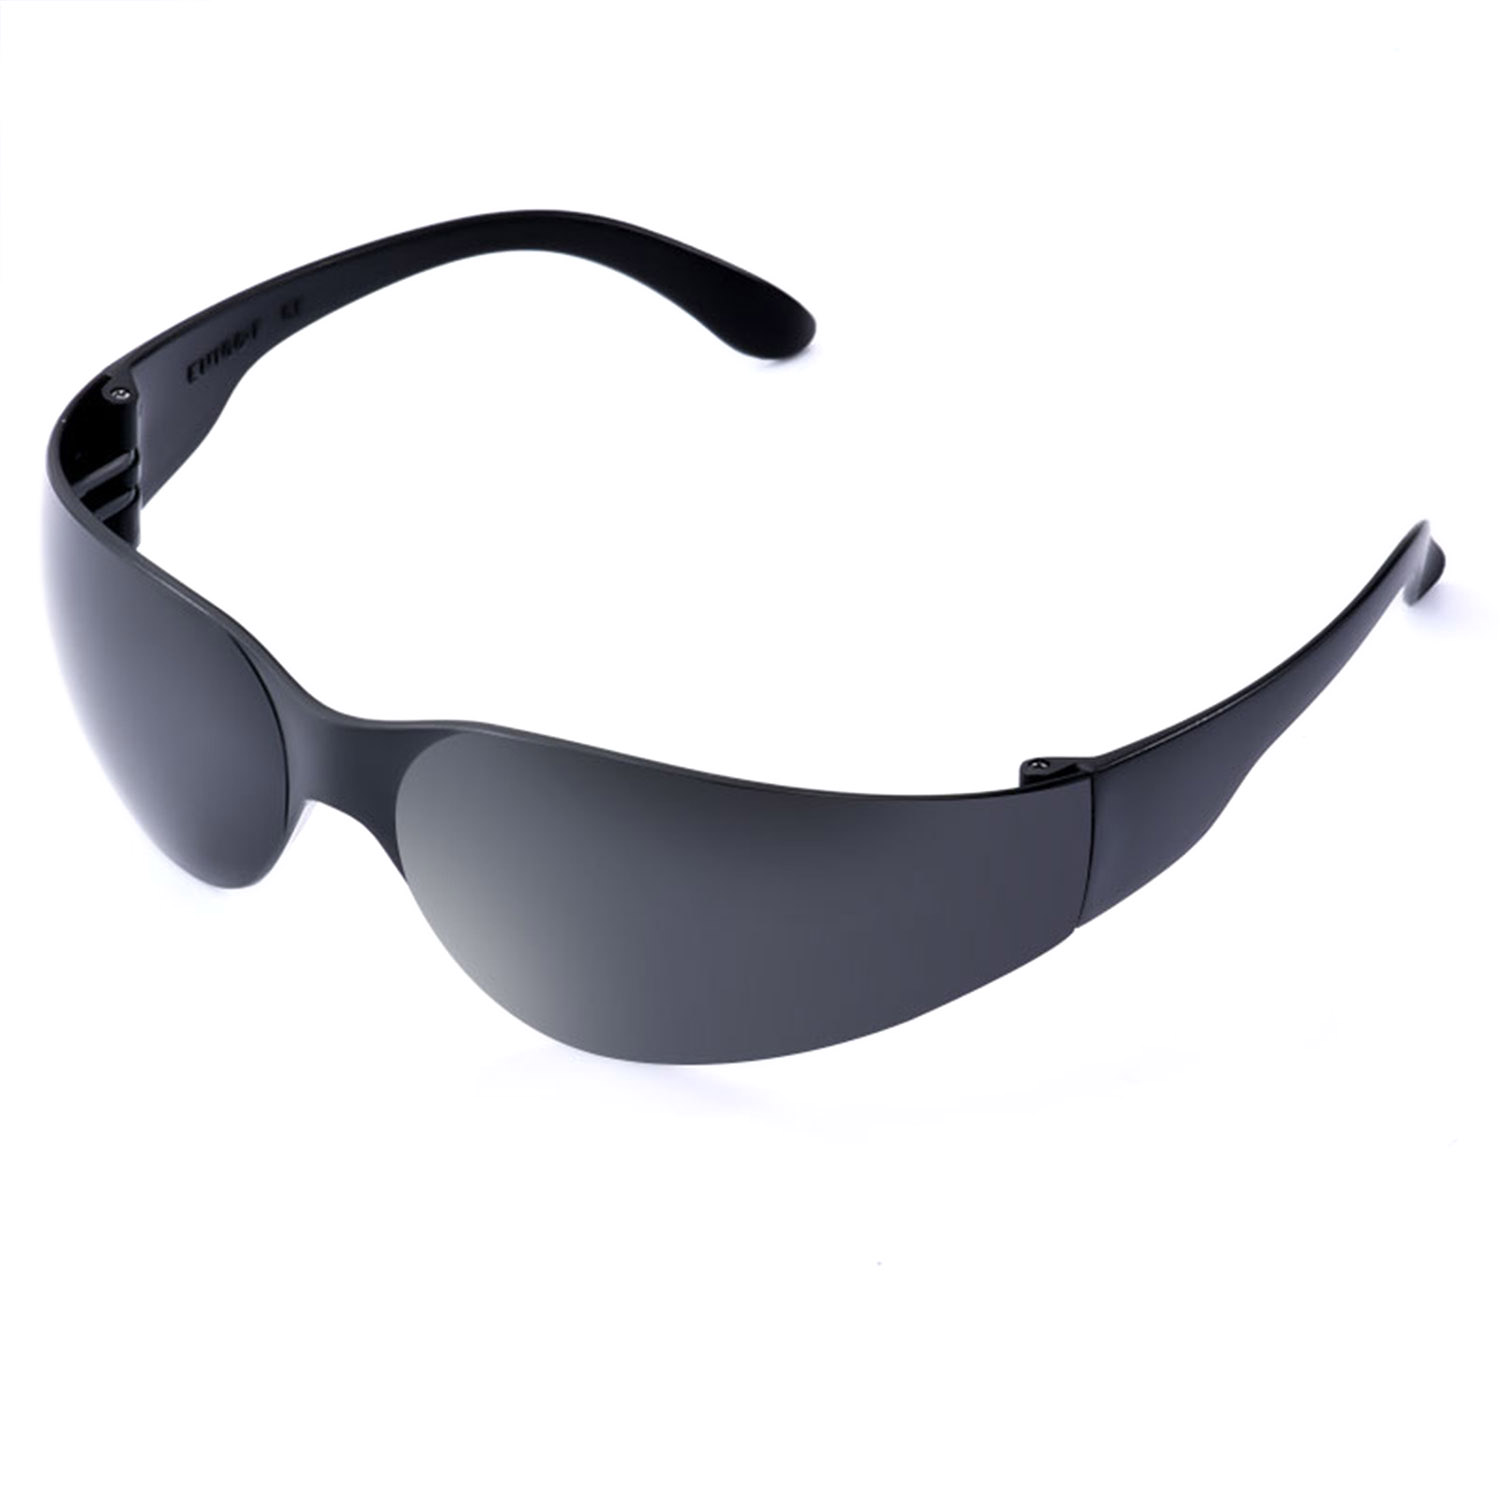 Protective Safety Sunglasses SG001 Black from China manufacturer - SHANGHAI  LANGFENG INDUSTRIAL CO.,LTD